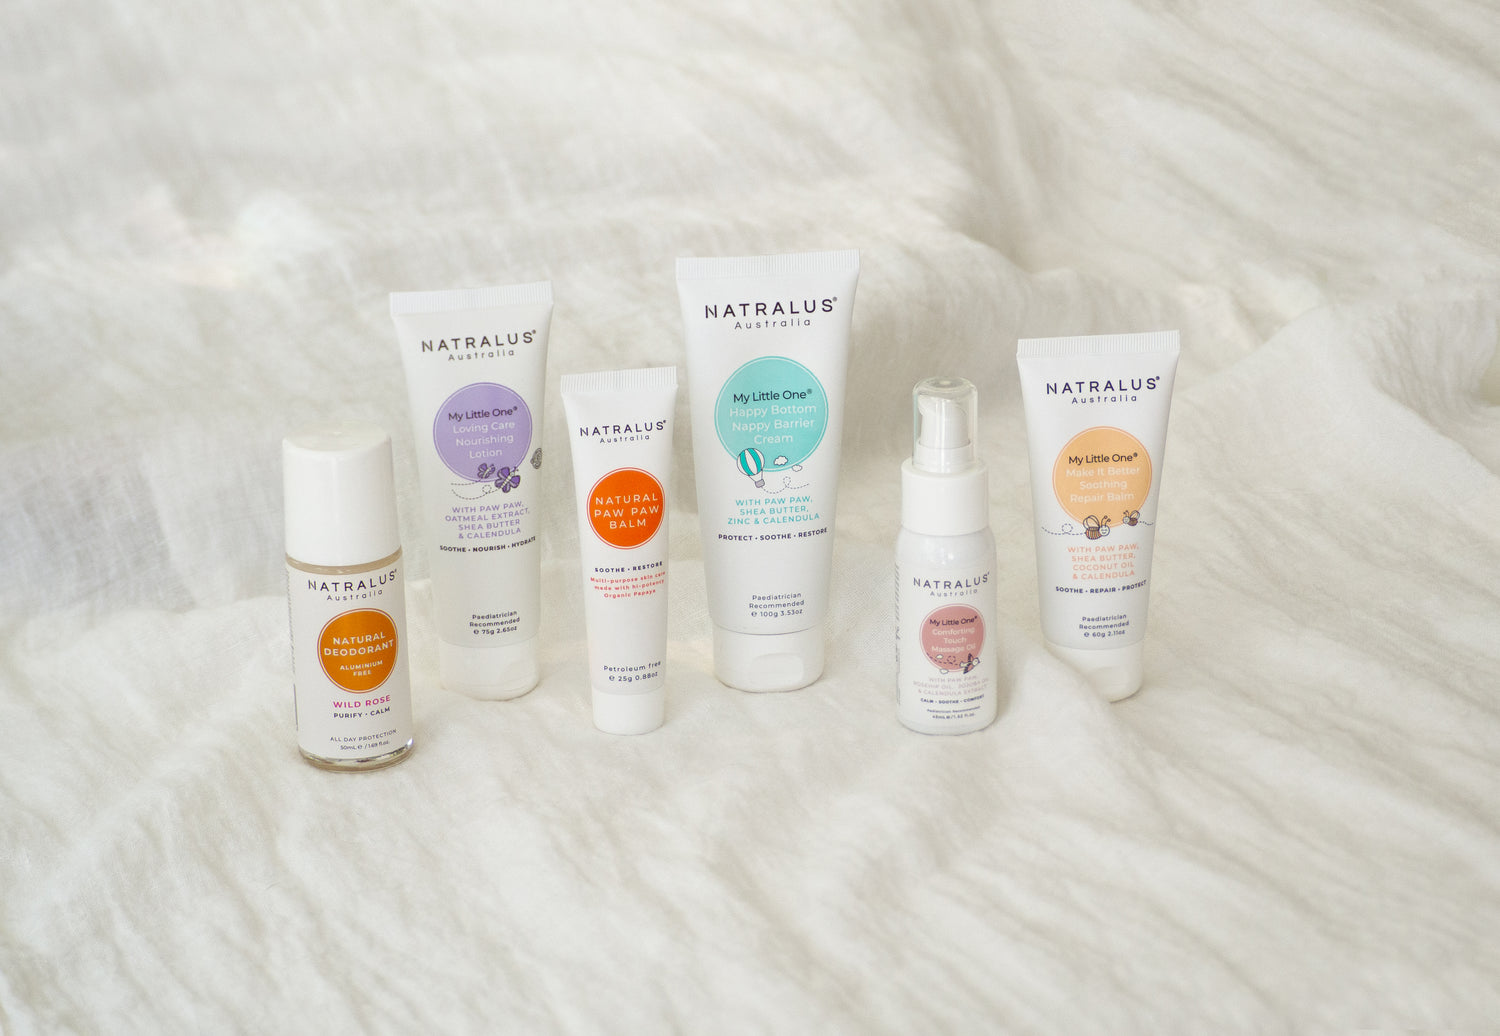 Using Paediatrician recommended products to treat baby's sensitive skin